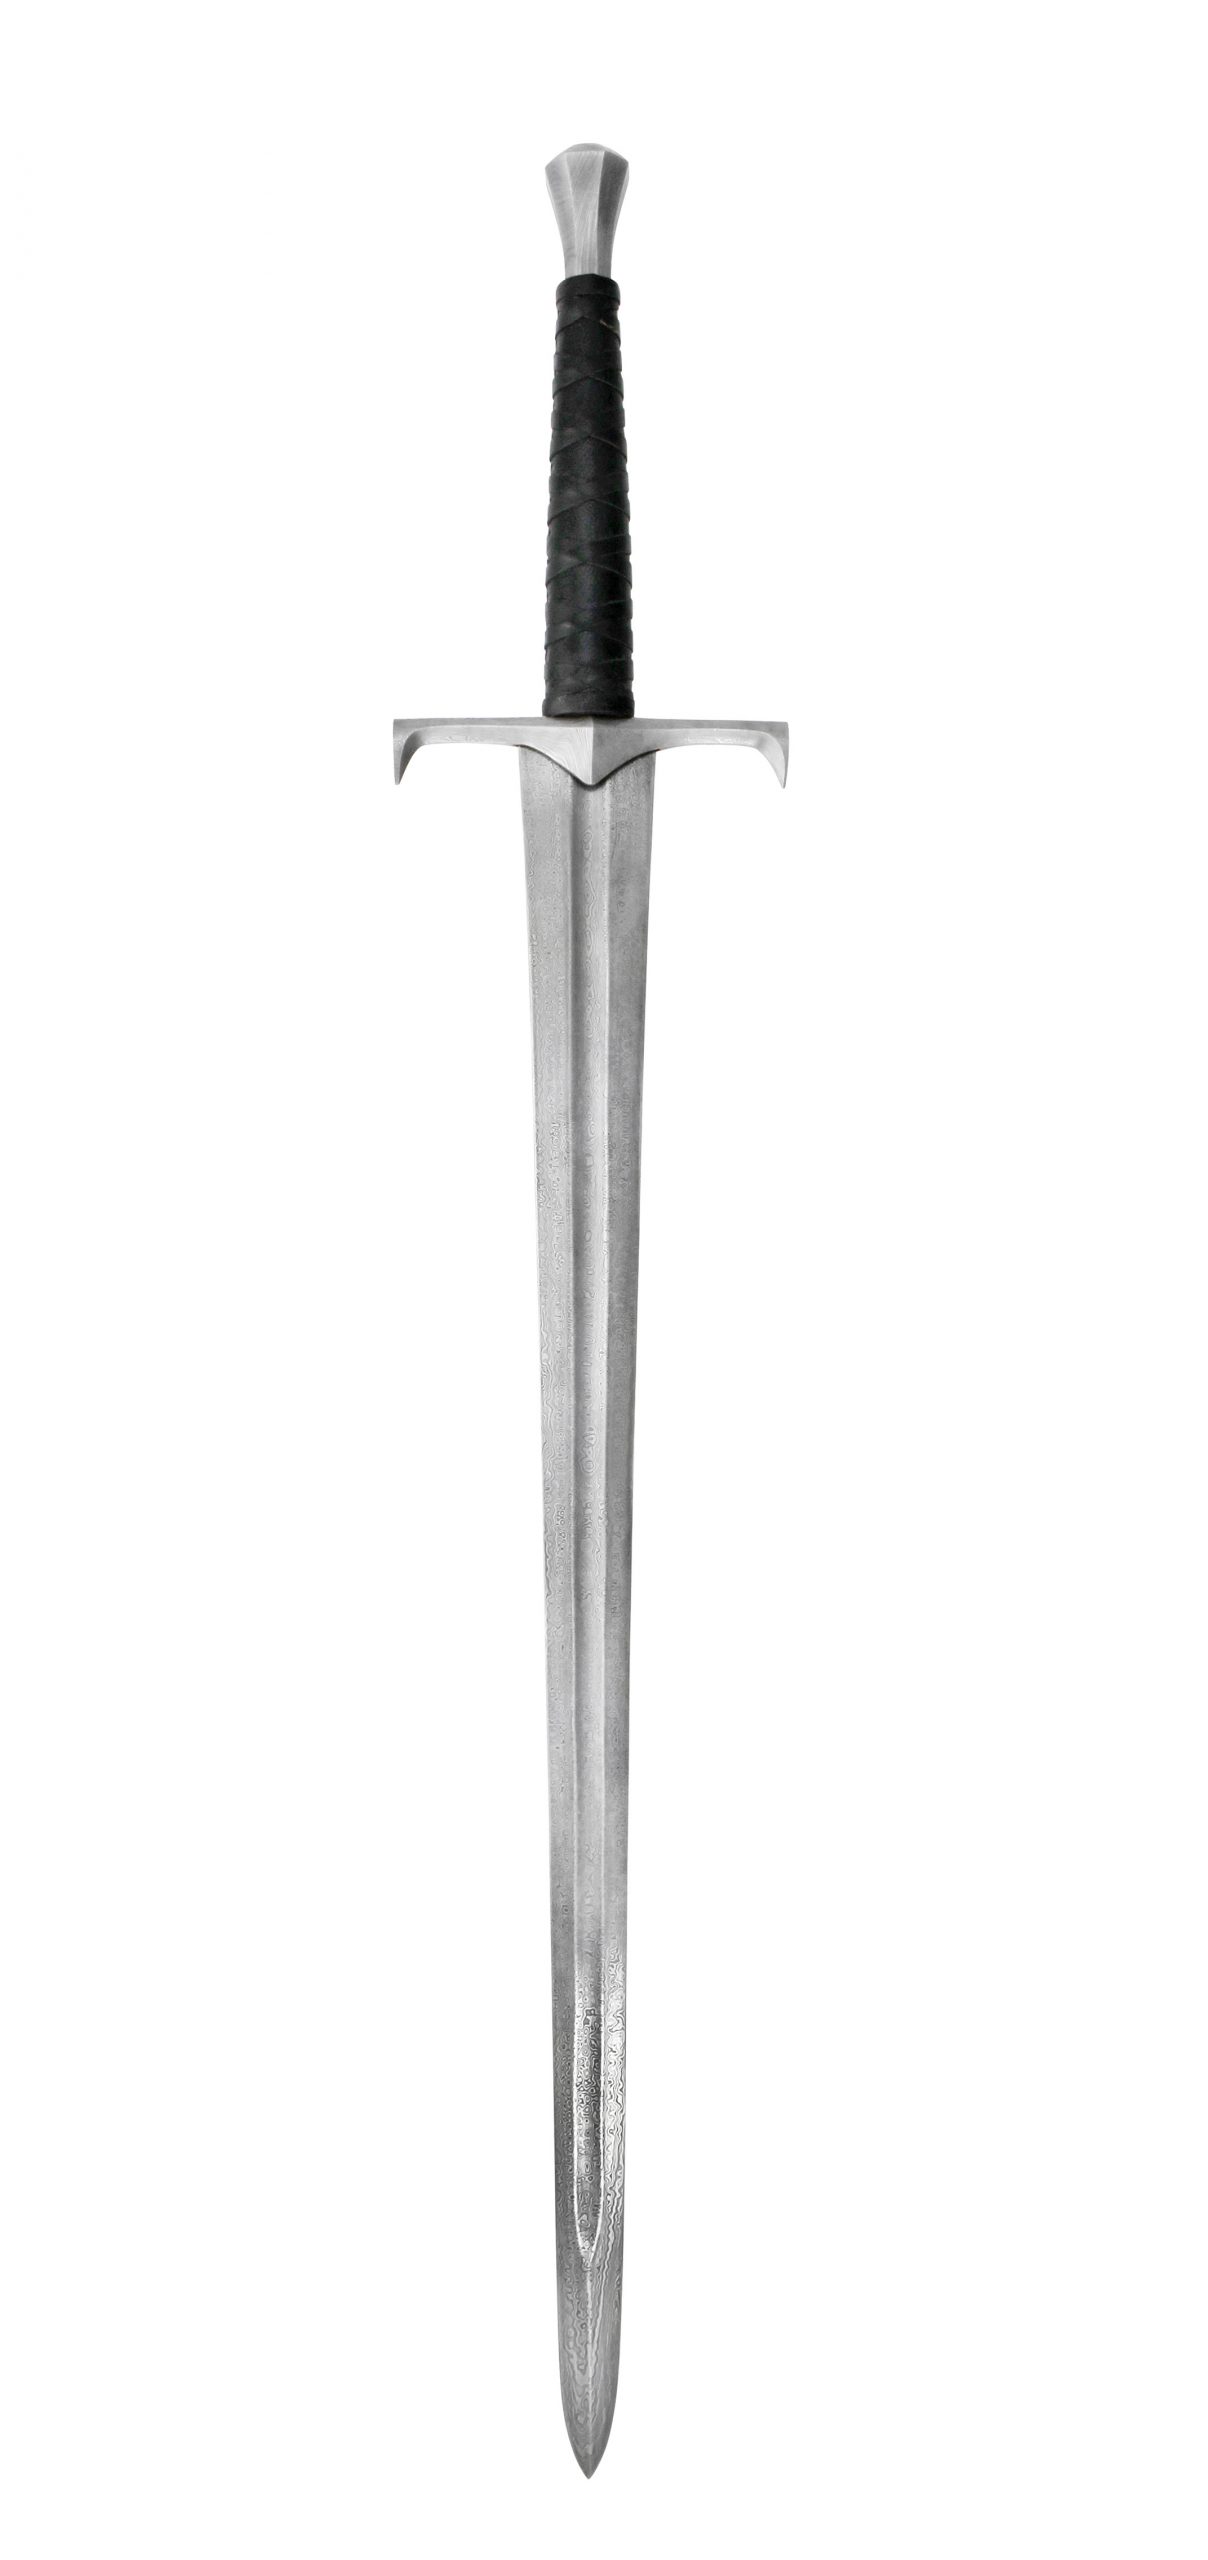 https://www.darksword-armory.com/wp-content/uploads/2016/05/the-viscount-elite-series-damascus-steel-medieval-sword-scaled.jpg